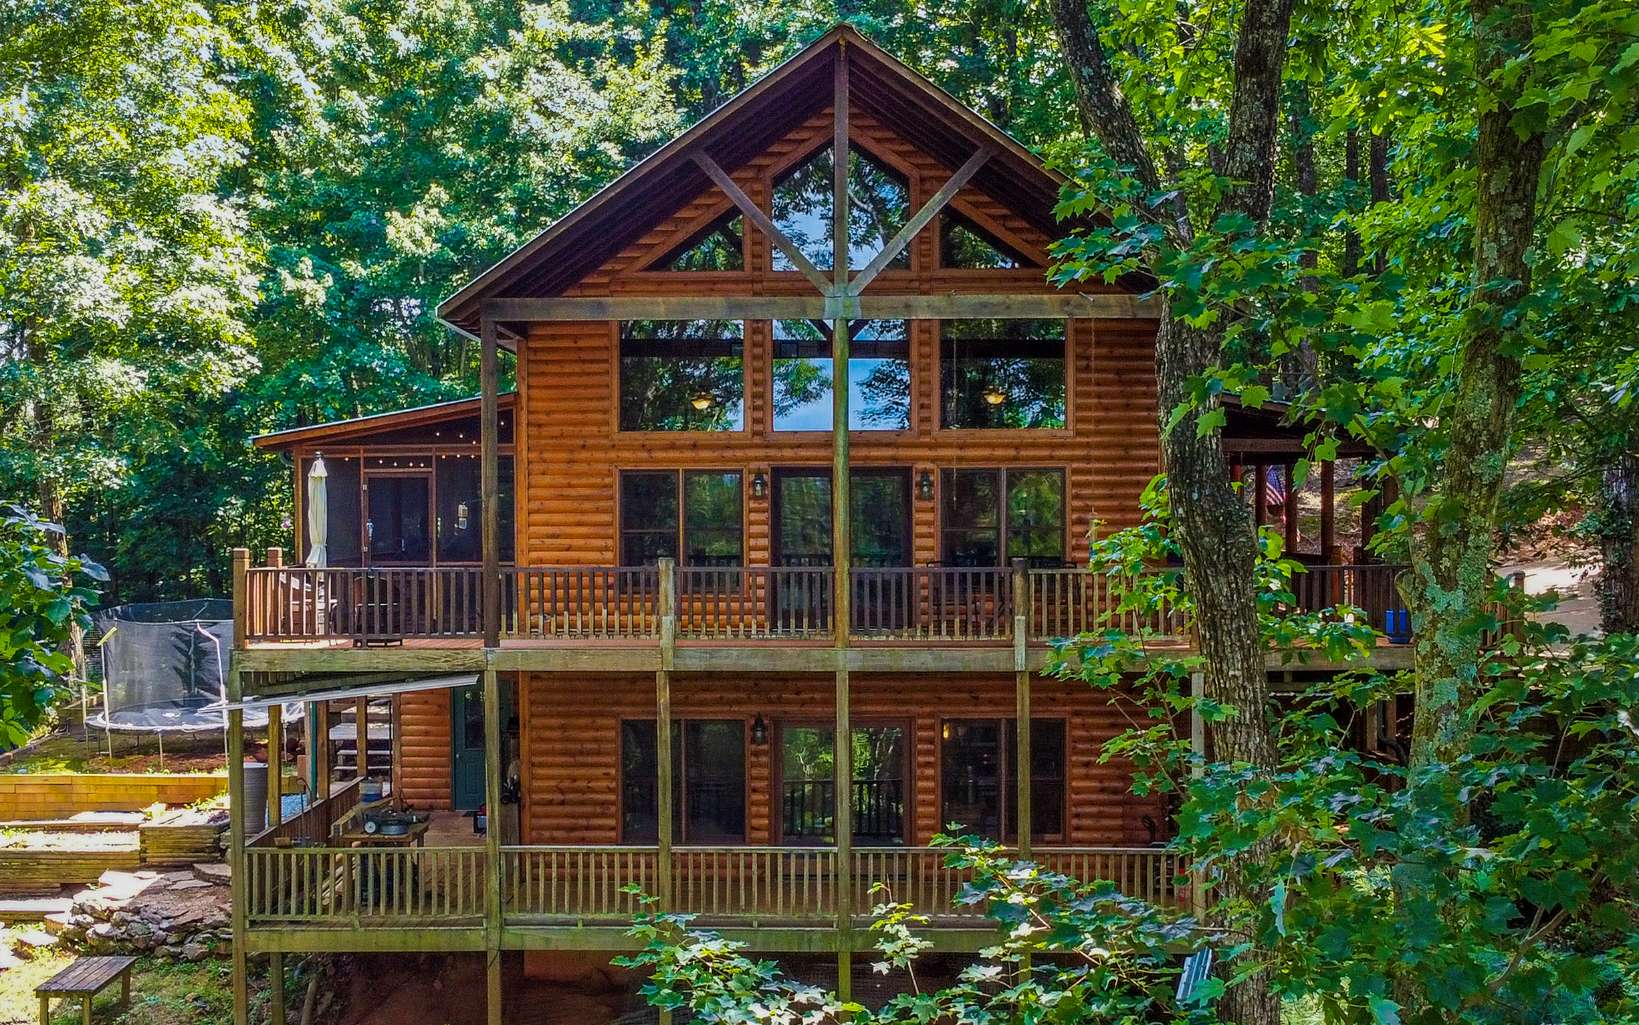 Charming Cozy Cabin with STUNNING North GA Mtn views, gently situated on 2.37 private acres of unrestricted land only 8 miles to DT Ellijay! This one of a kind cabin features 4 bed/ 3 master bath with a jacuzzi tub, tile shower and large garden tub, 2 living rooms, 2 full kitchens, 2 gas log fireplaces, an office area, roaring ceilings with plentiful large glass windows for a very open concept feel, real hardwood floors, granite countertops, luxurious tile bathroom floors & shower, master on main with walk in closet, chef's kitchen with custom cabinetry, a large pantry & stainless steel appliances! The fabulous fully finished basement features a 2nd living room and full kitchen that is perfect for guests, a big group or family to use. Would also make a great movie room/game room/apartment! Wonder outside to relax on the wrap around porches that are on each level, a screened in porch area, firepit area, fenced in yard area for dogs, large garden shed/utility closet perfect for storage and more. No to mention home wired with SONOS sound speakers for the best sounds when listing/watching TV. $70-80k rental projection from local Vacation Rental company! HVAC serviced in Sept 2020. Would make a great vacation rental- perfect for full time, much needed getaway or smart investment for a retreat. No details were left out on this beauty, come view today!